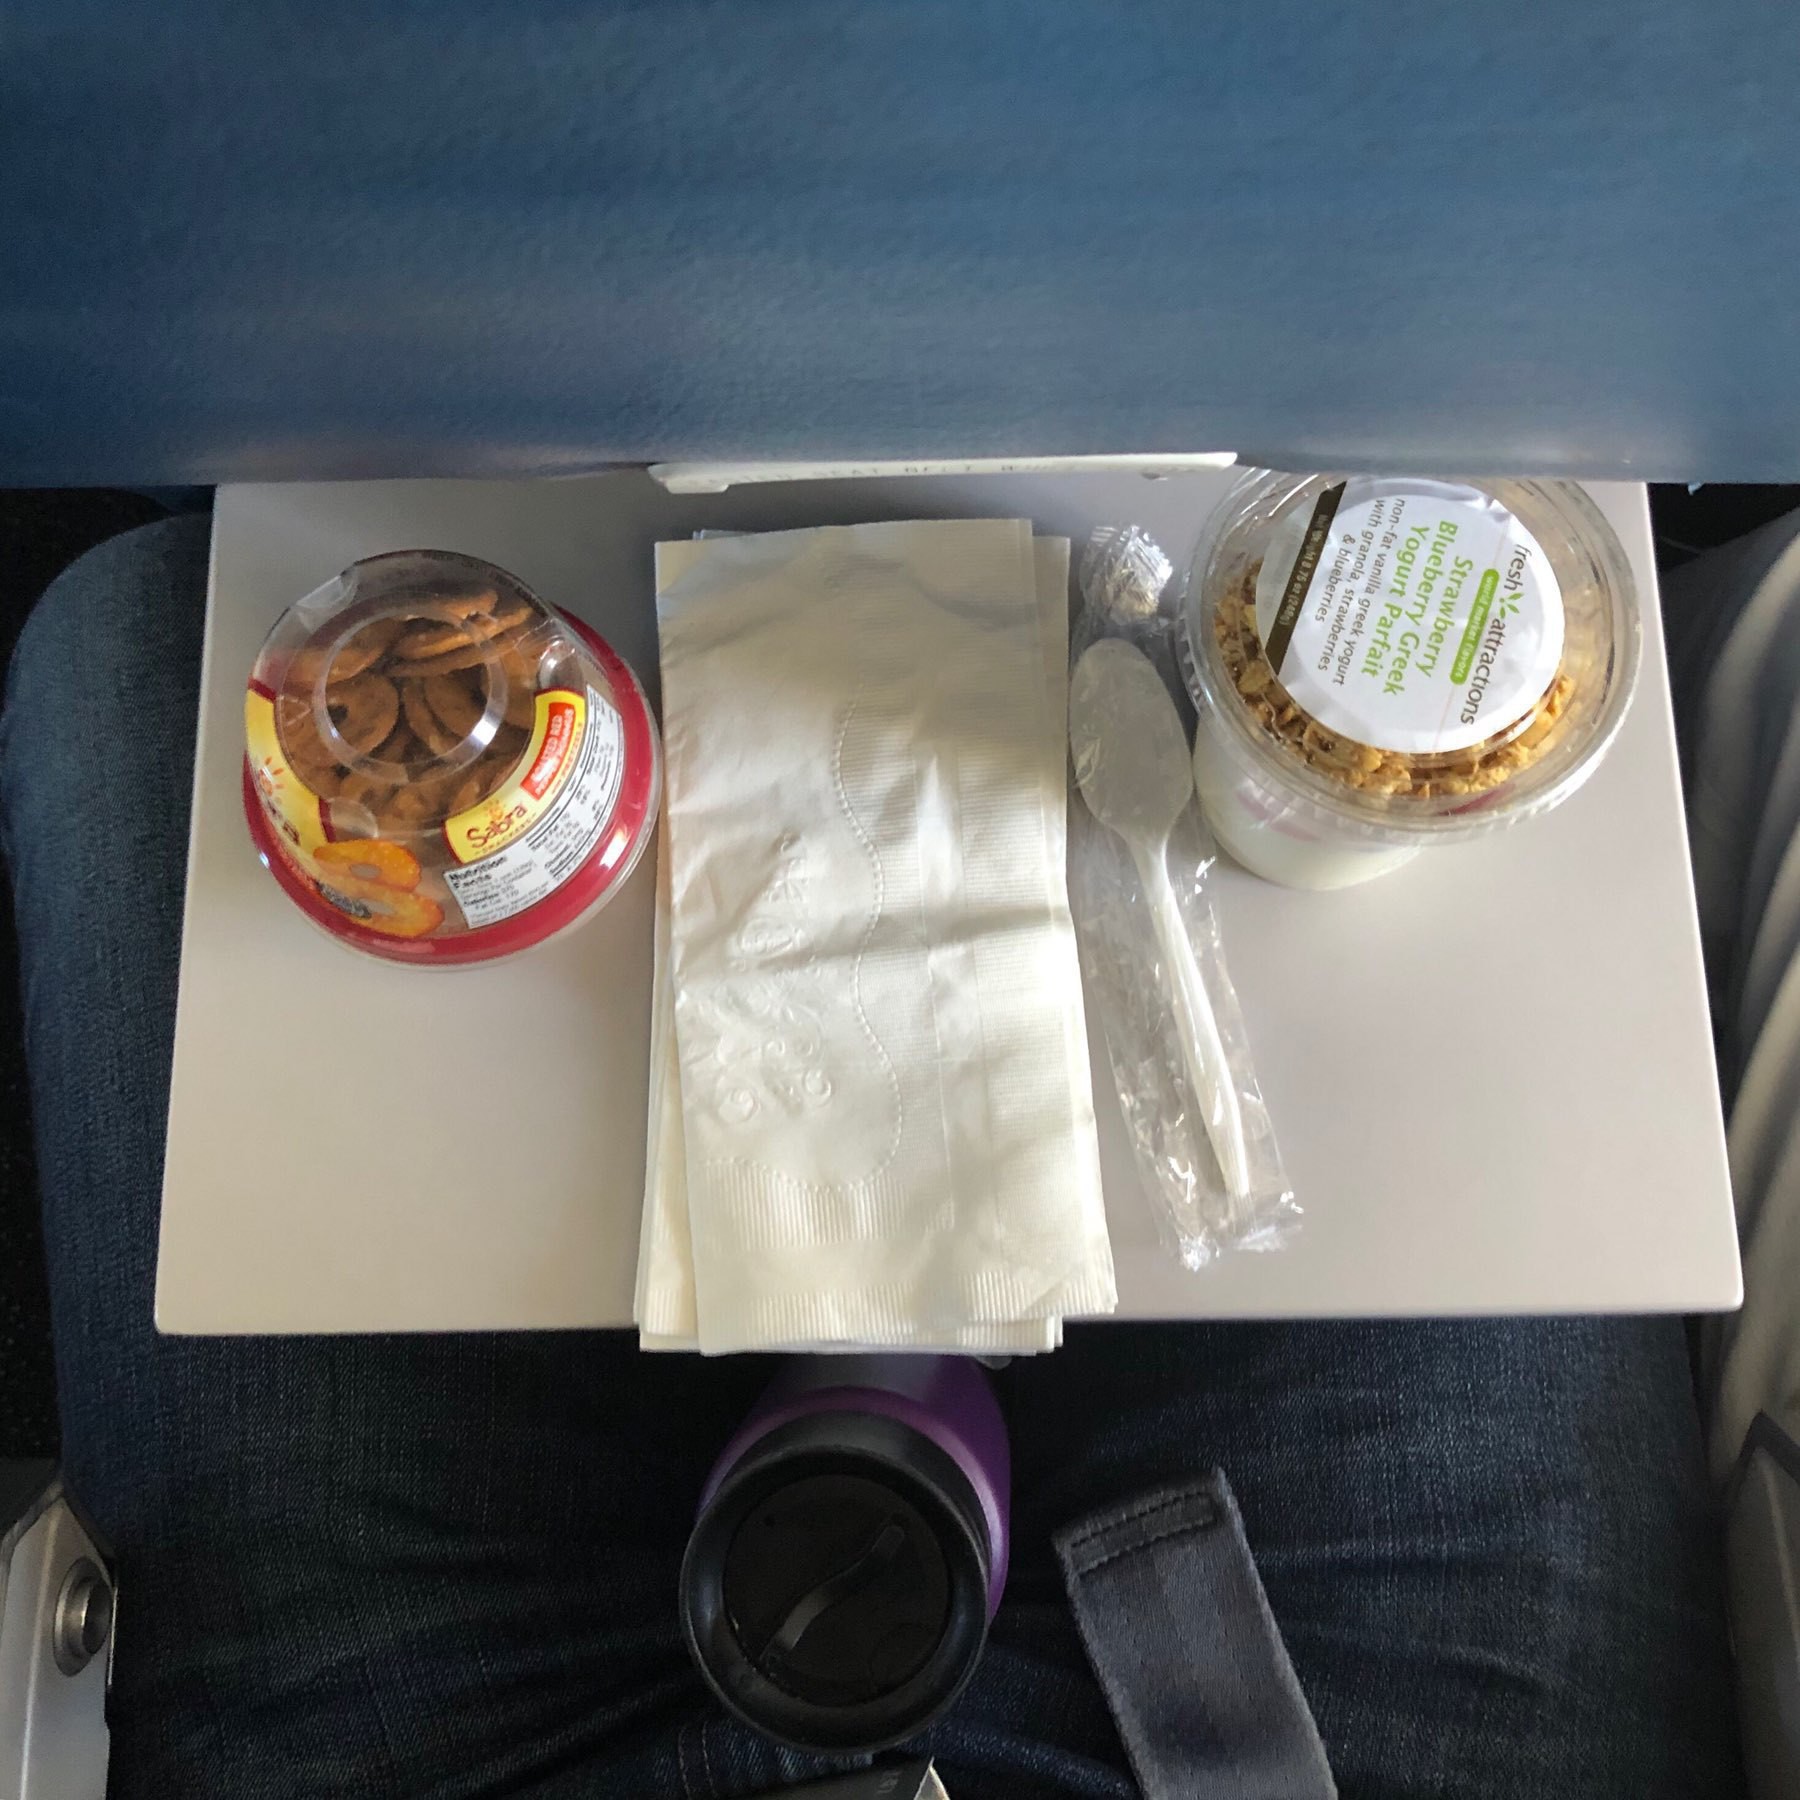 Airline tray table with not enough room